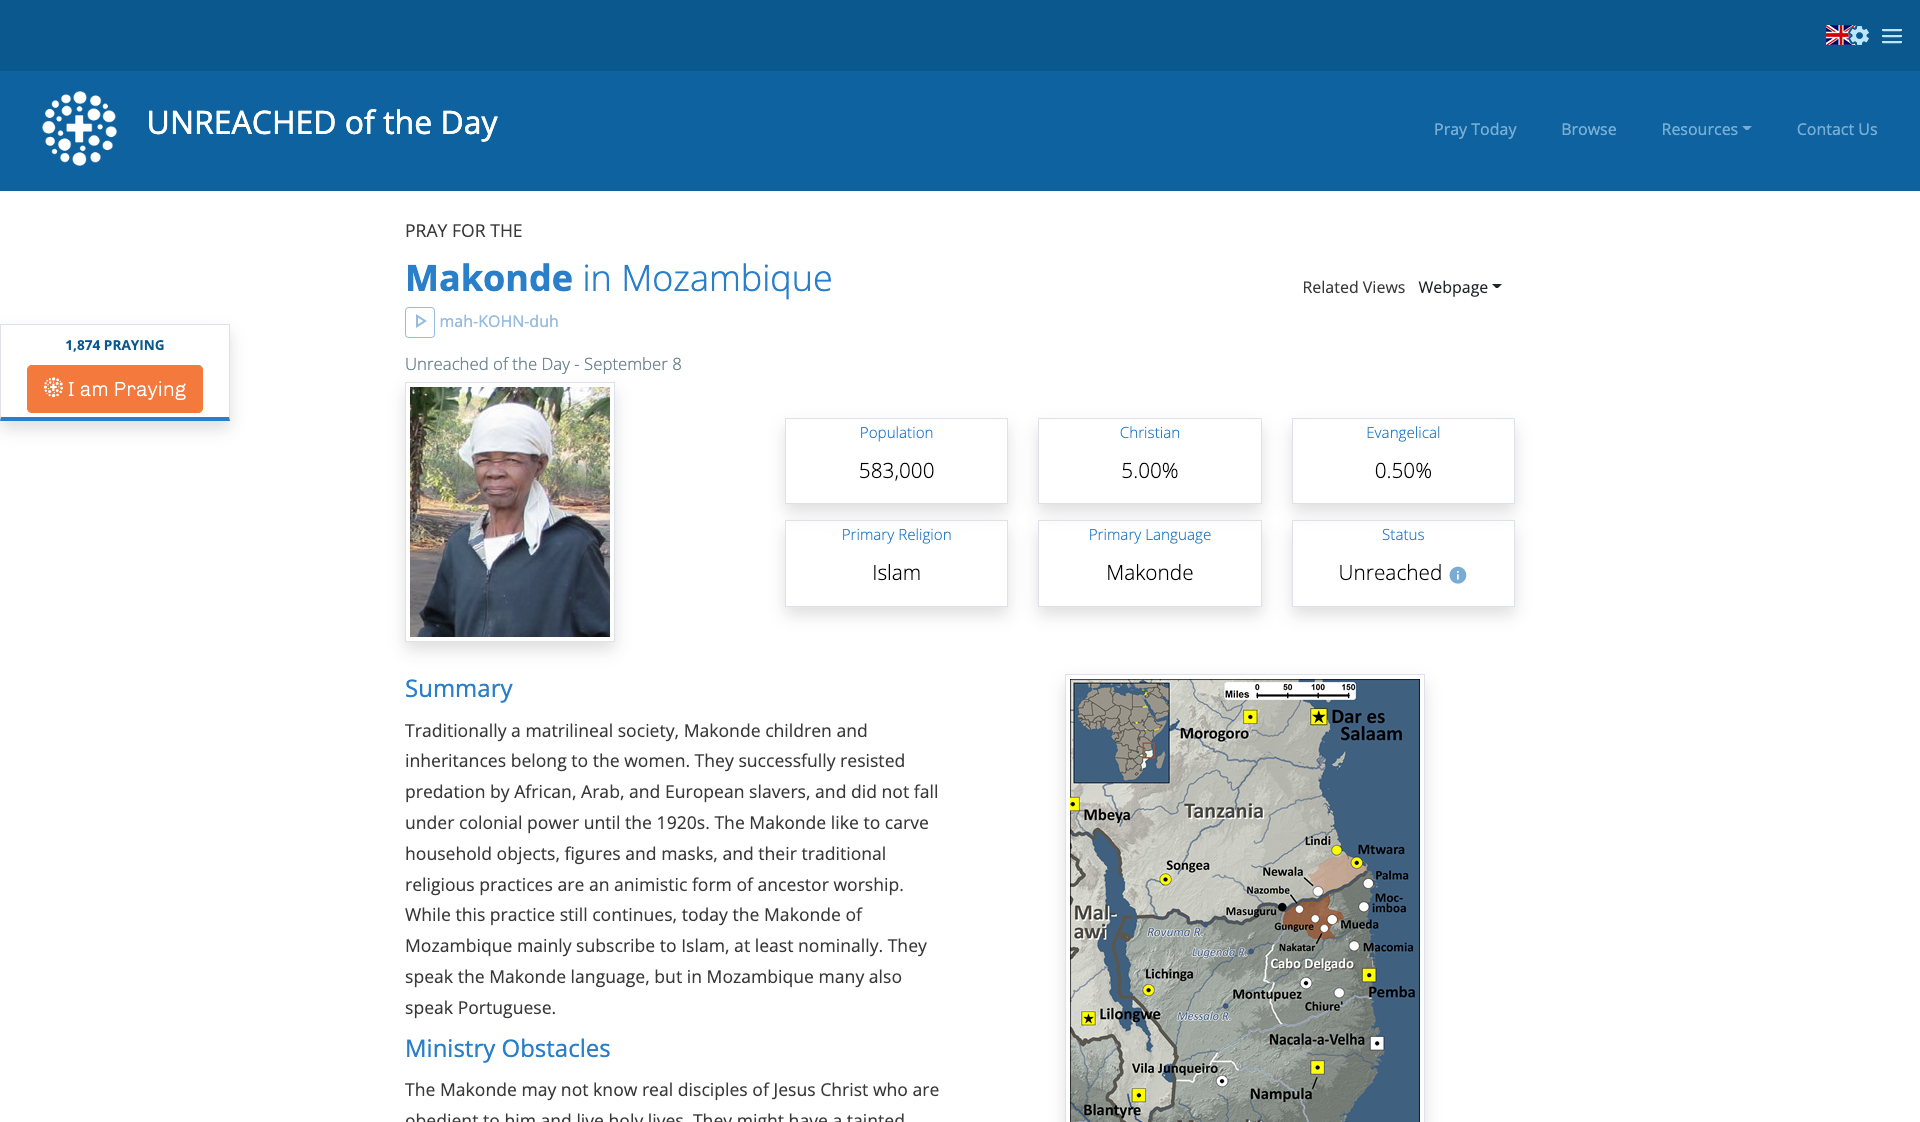 Image from the Project: Unreached of the Day Website